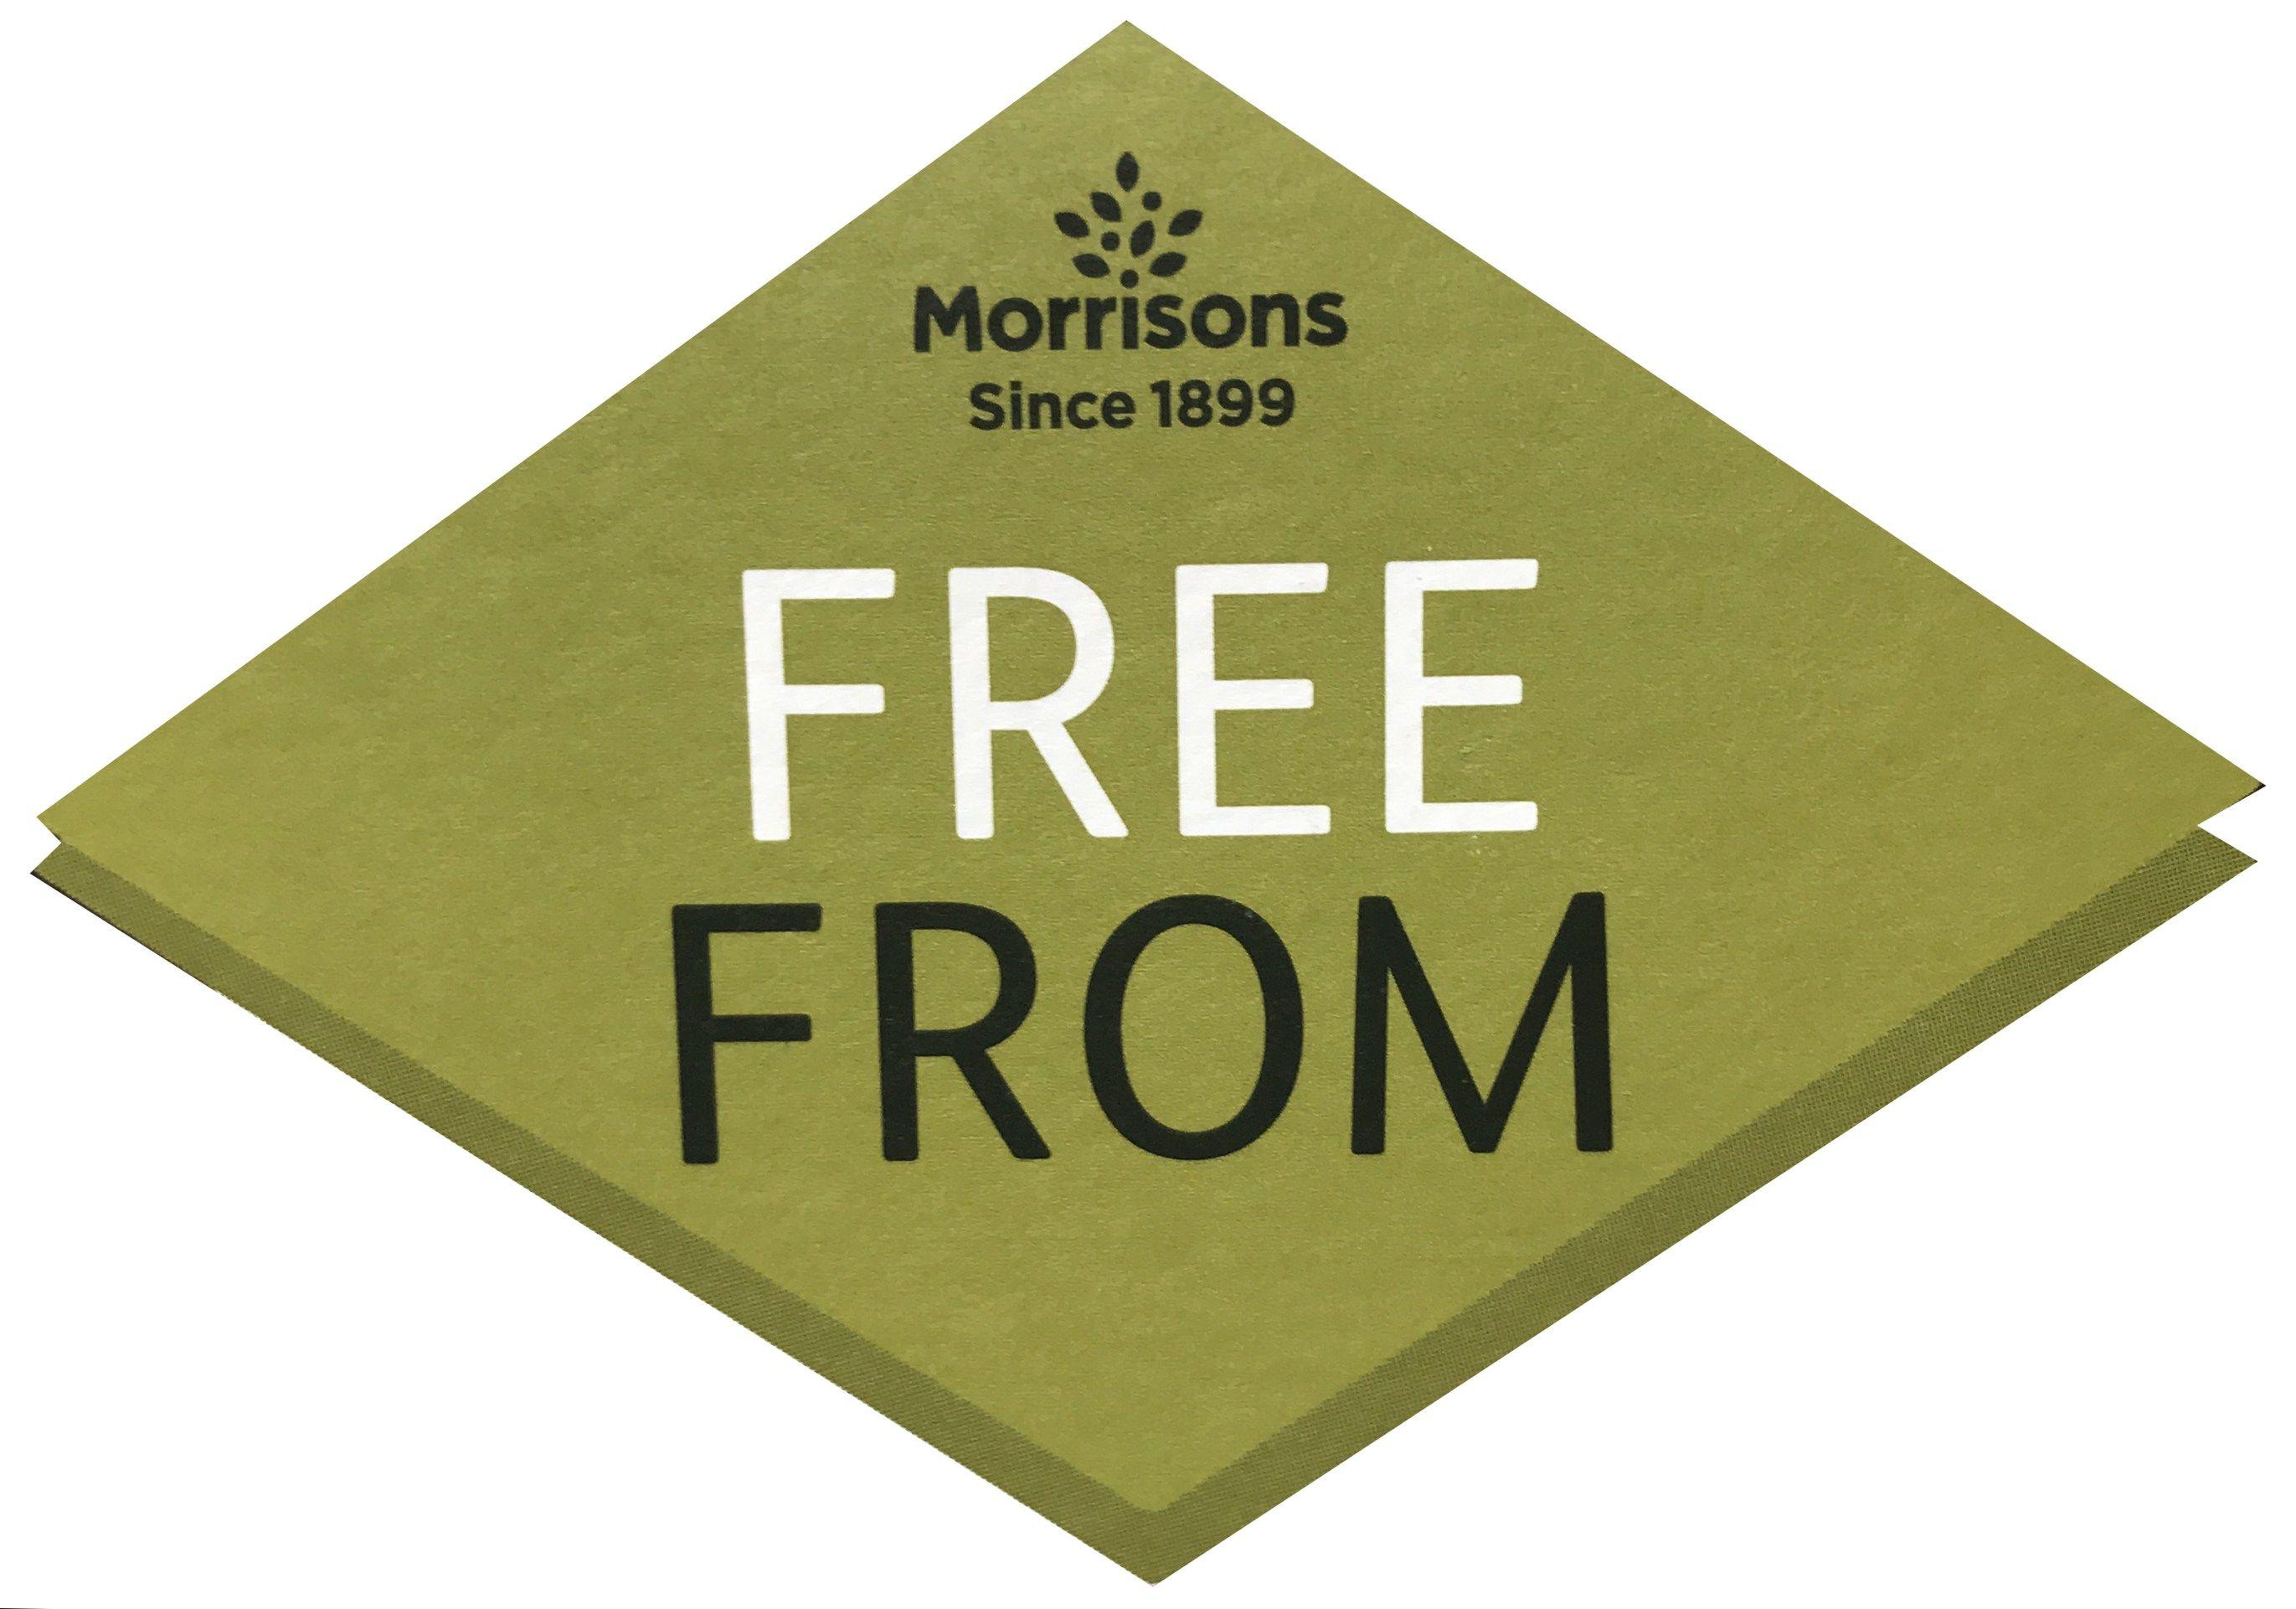 Freefrom Logo - Morrisons 'Free From Feast'